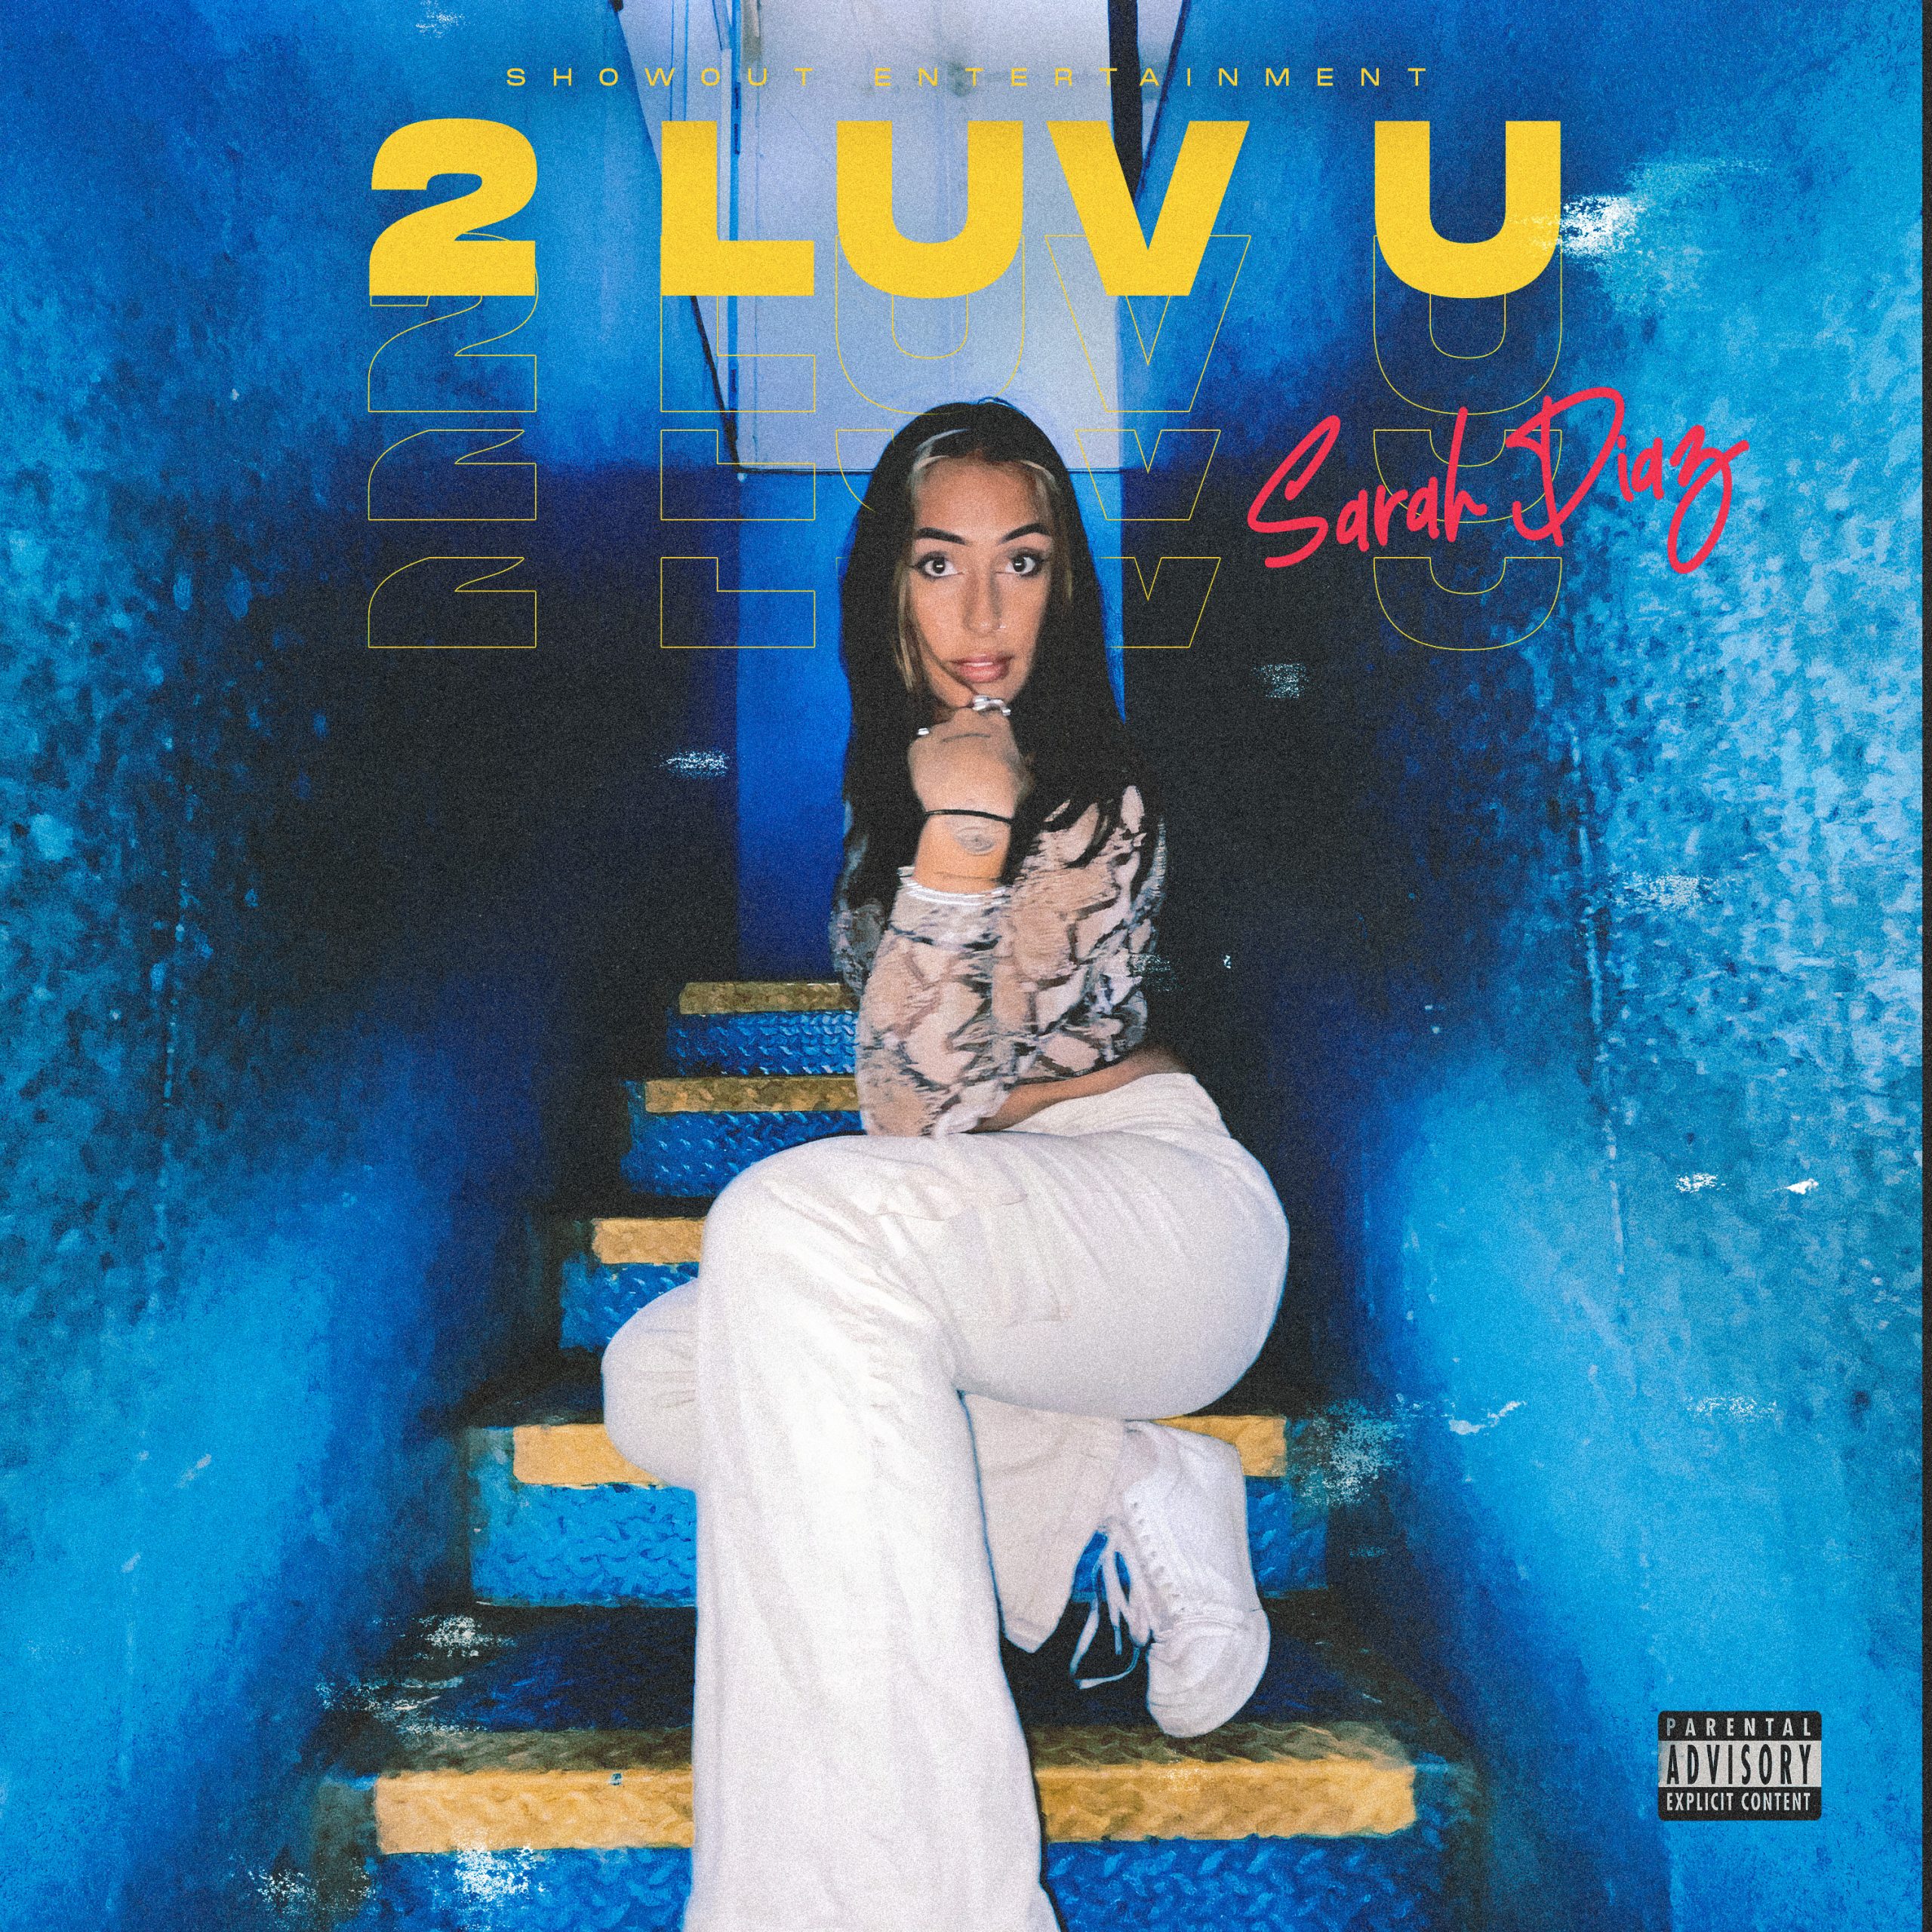 The new single ‘2 Luv U’ from ‘Sarah Diaz’ with its beautiful unique vocals is on the playlist now.